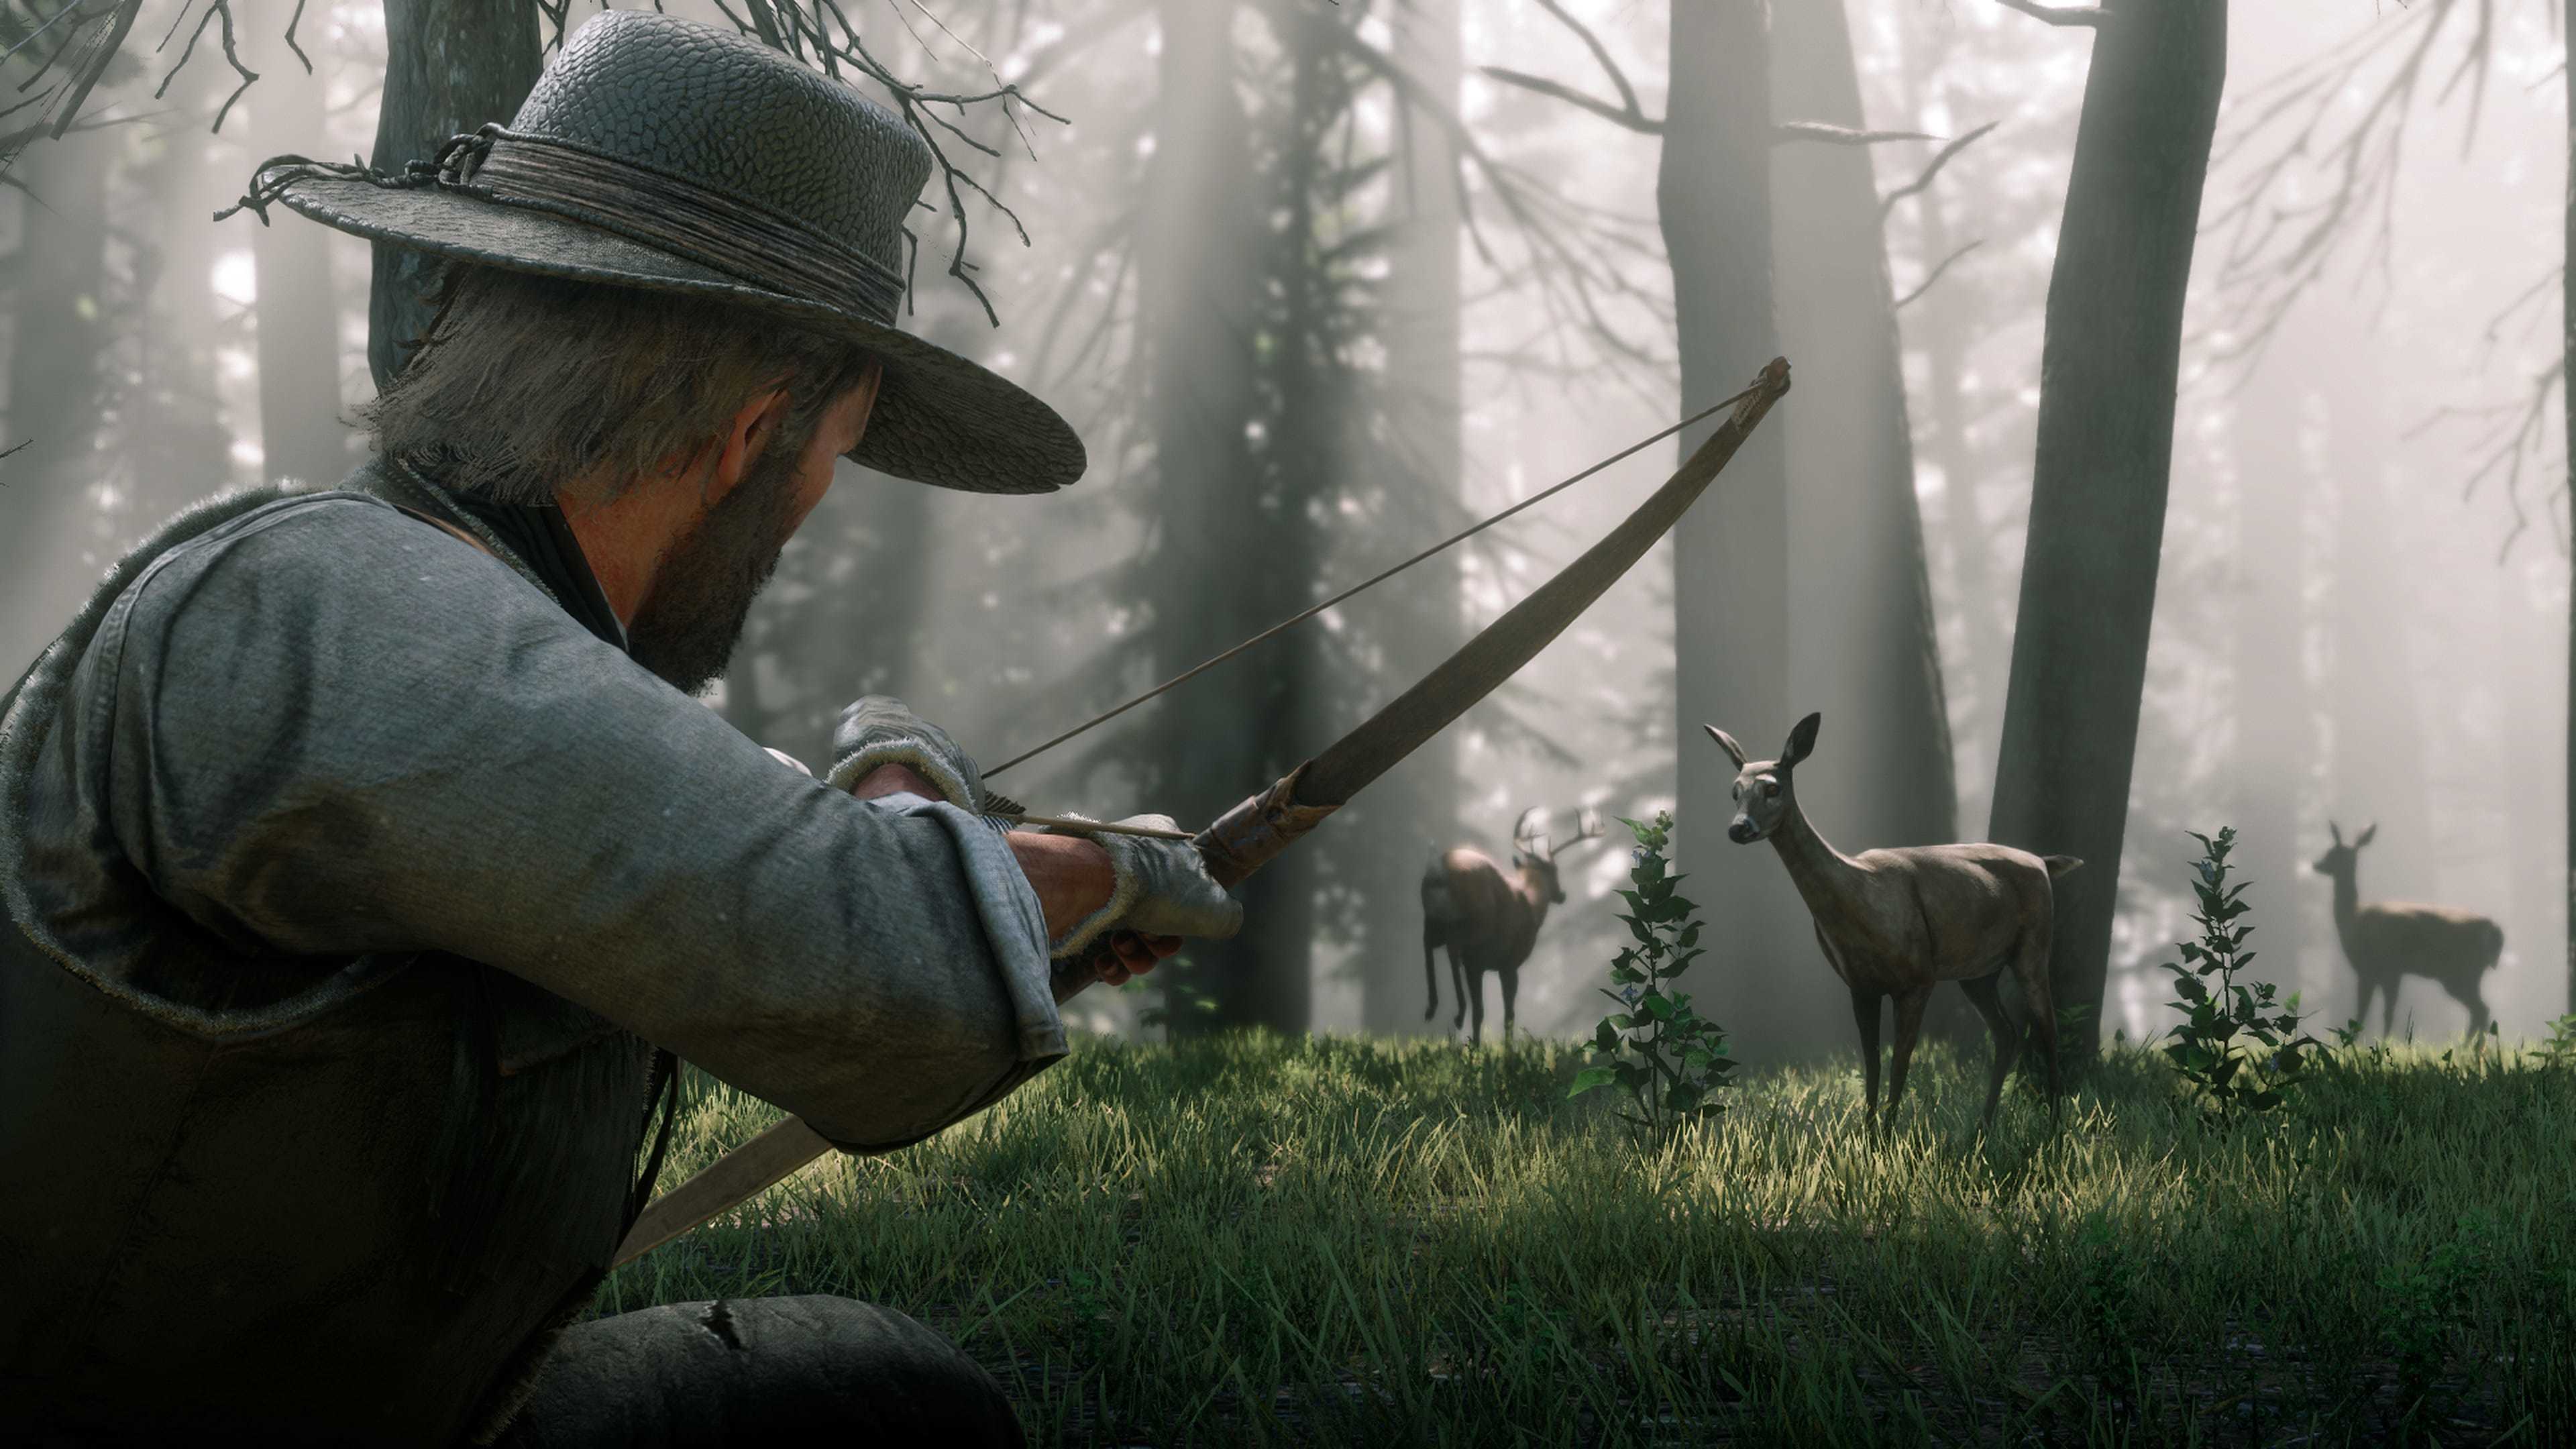 Is there a cross-platform in Red Dead Online? - Gaming, Gaming Blog